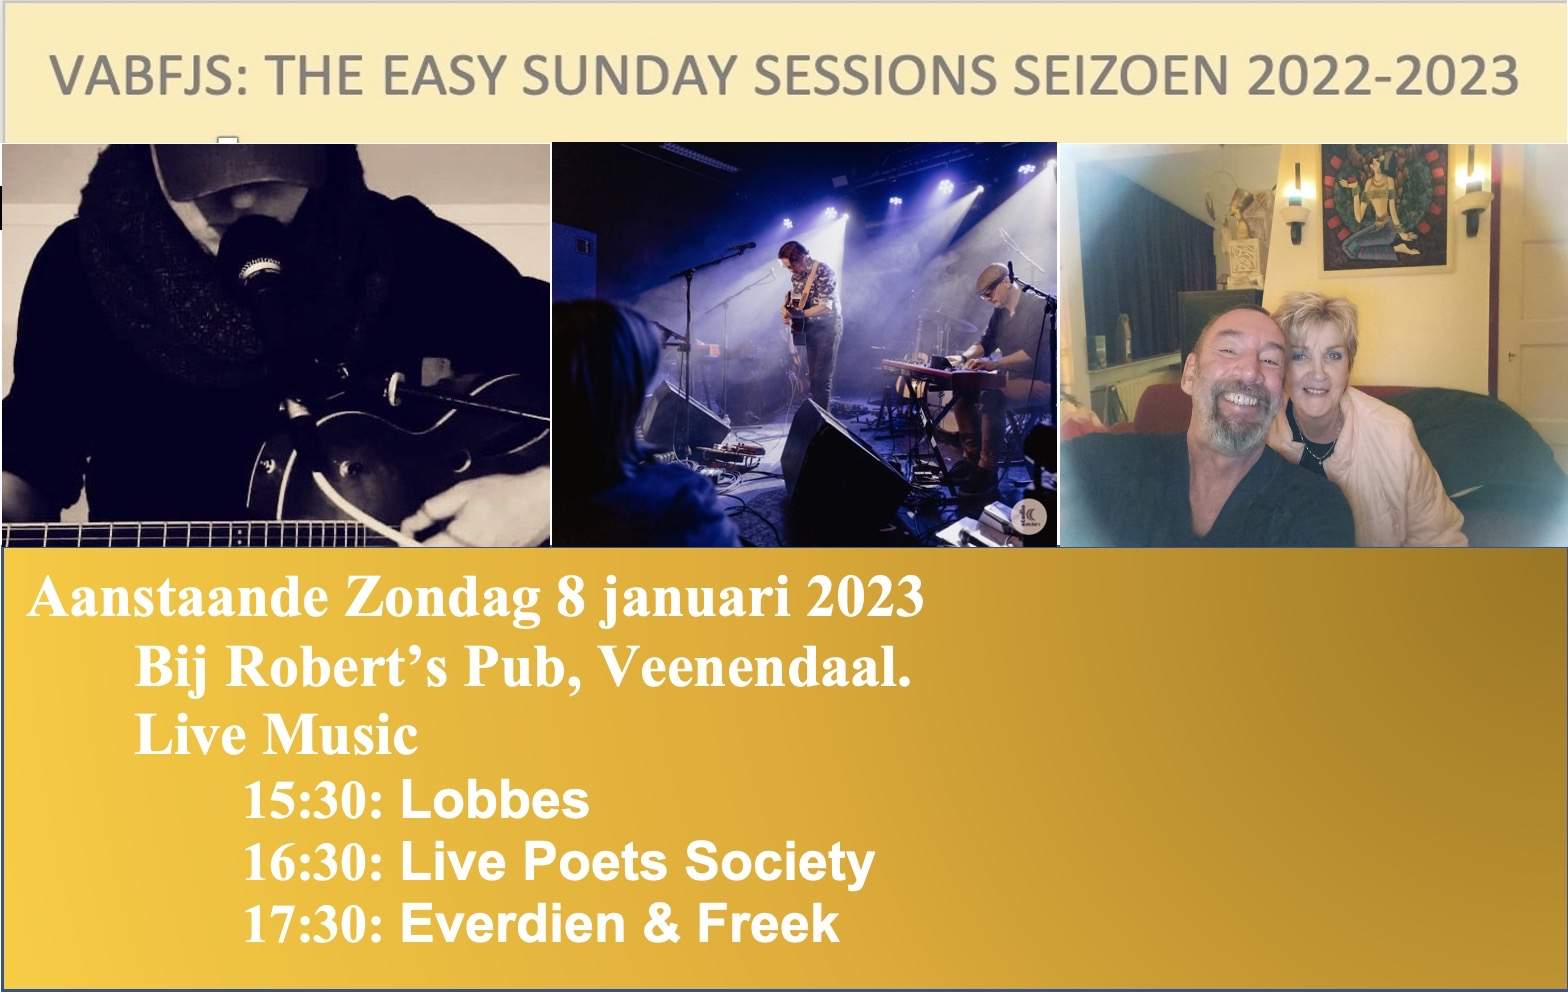 The Easy Sunday Sessions